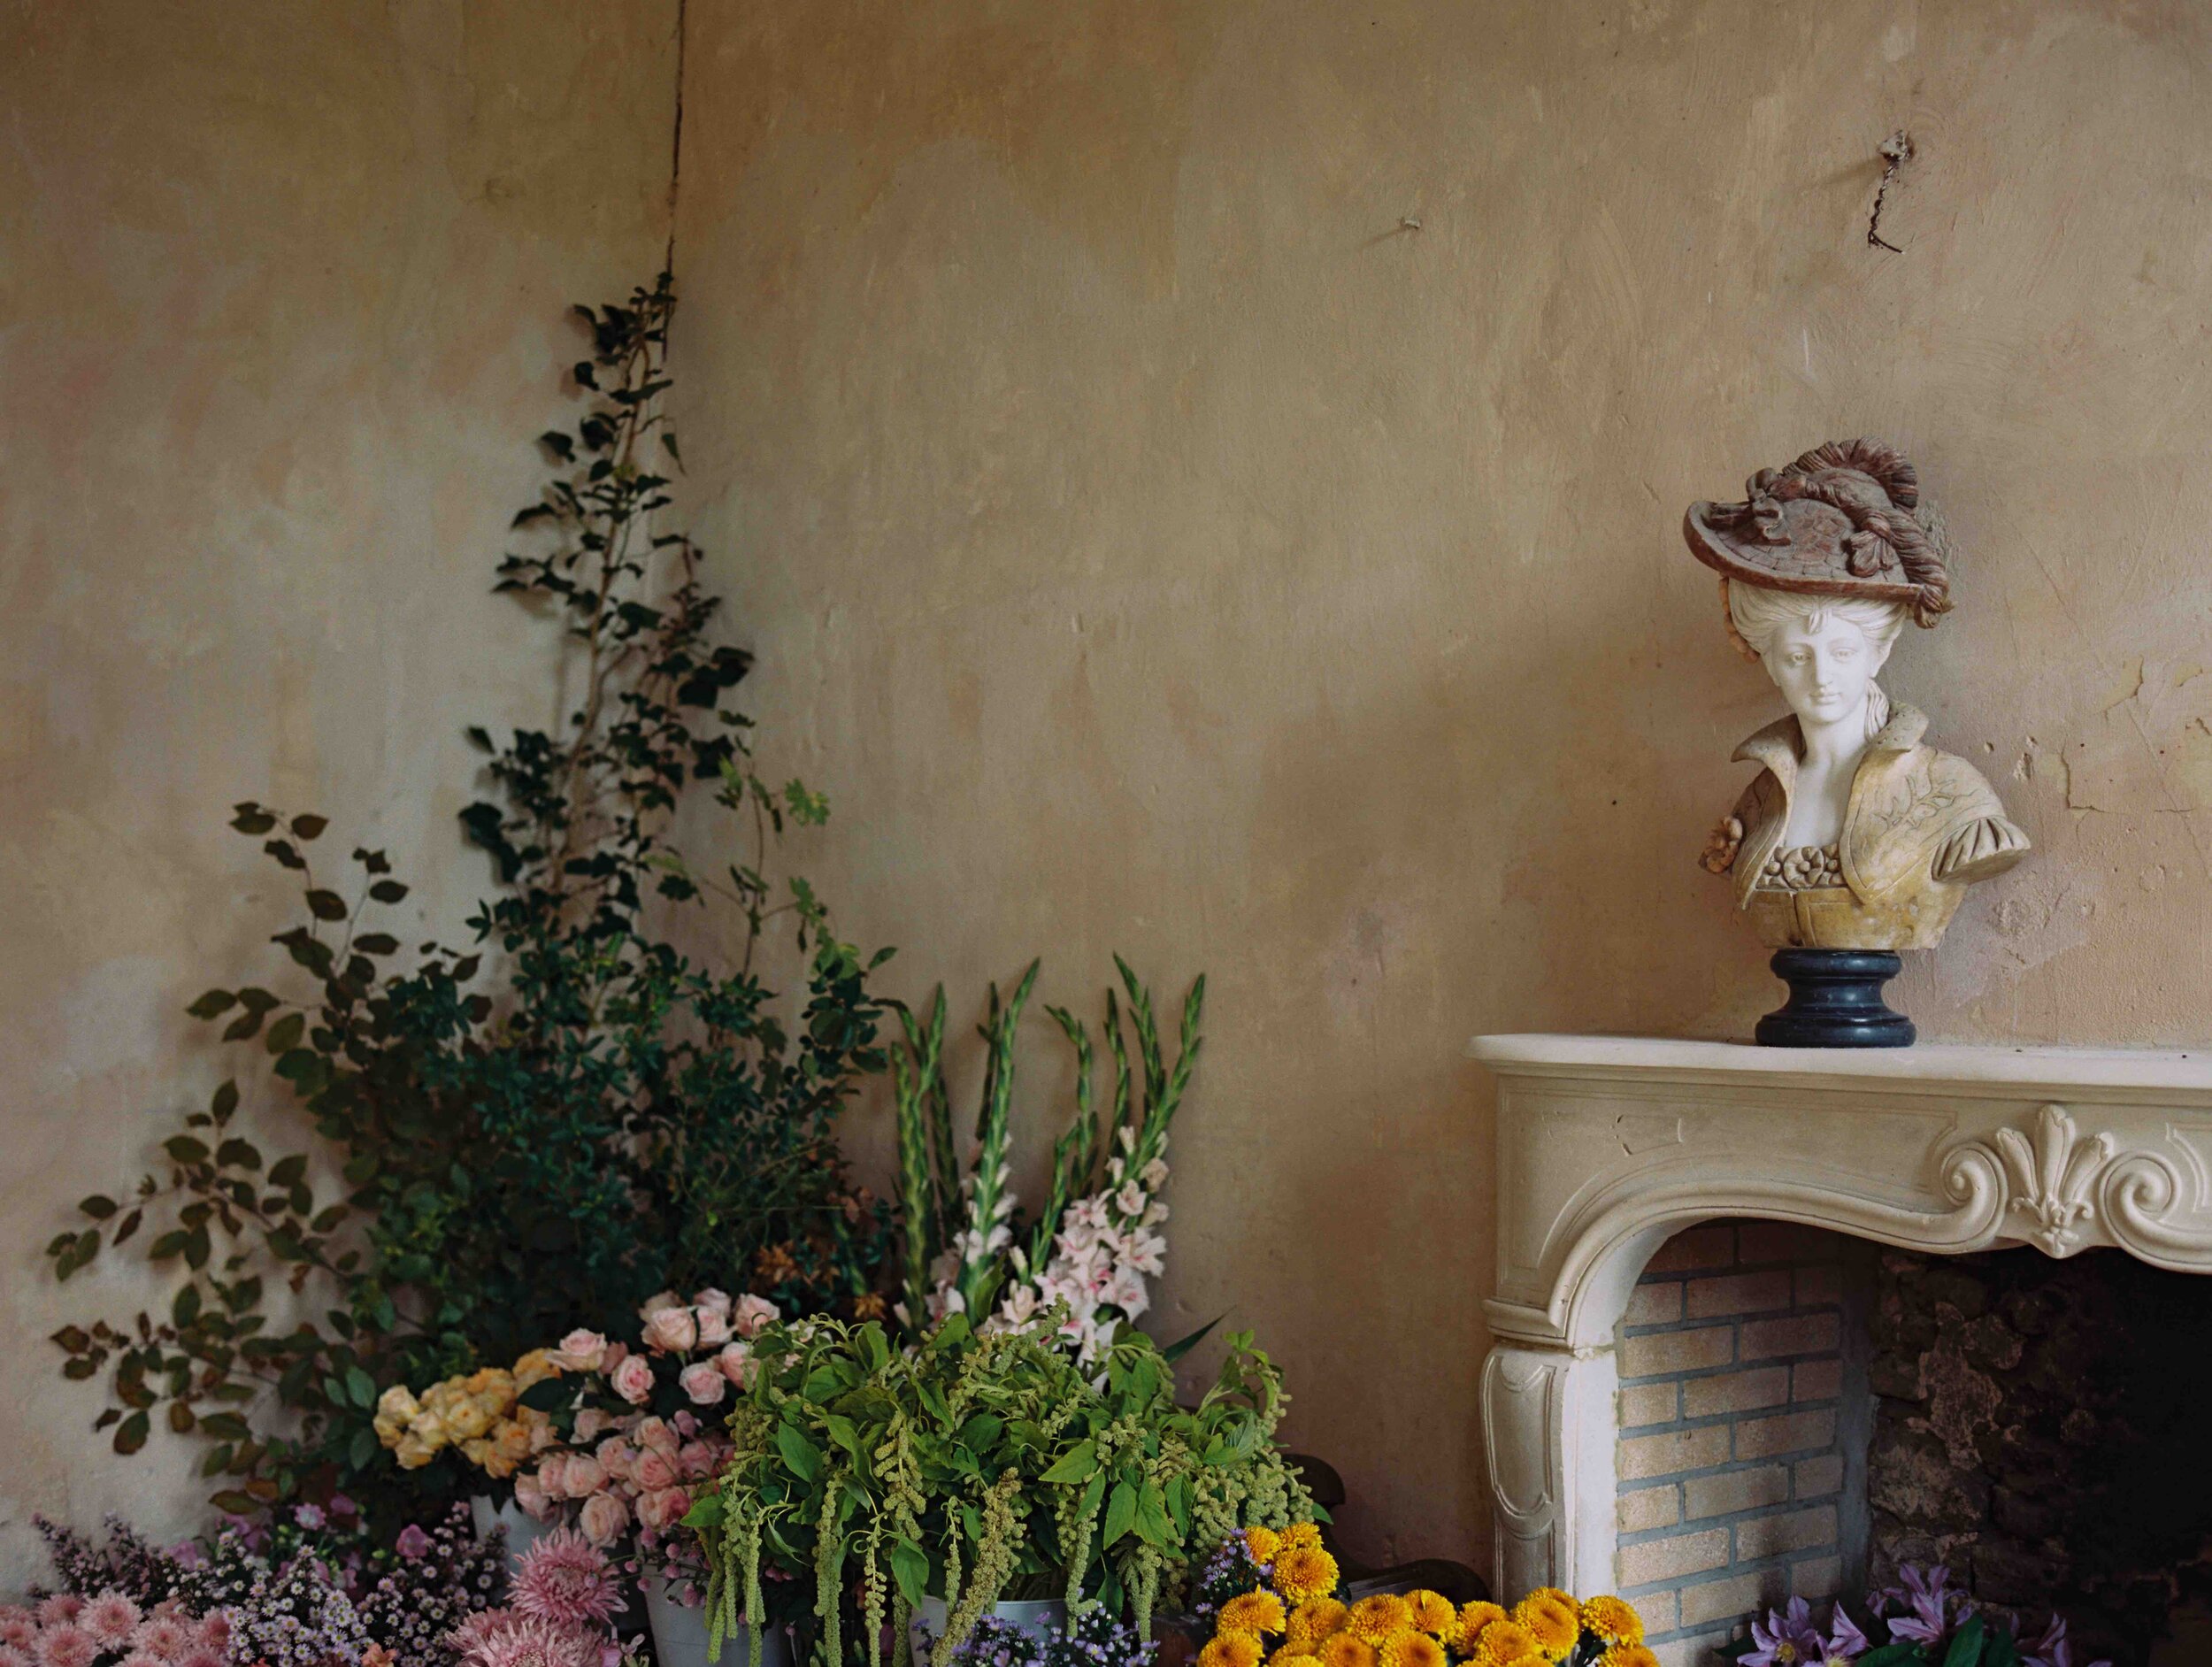 A room filled with flowers around a cozy fireplace, created during the Ponderosa and Thyme workshop, an event at the chateau.